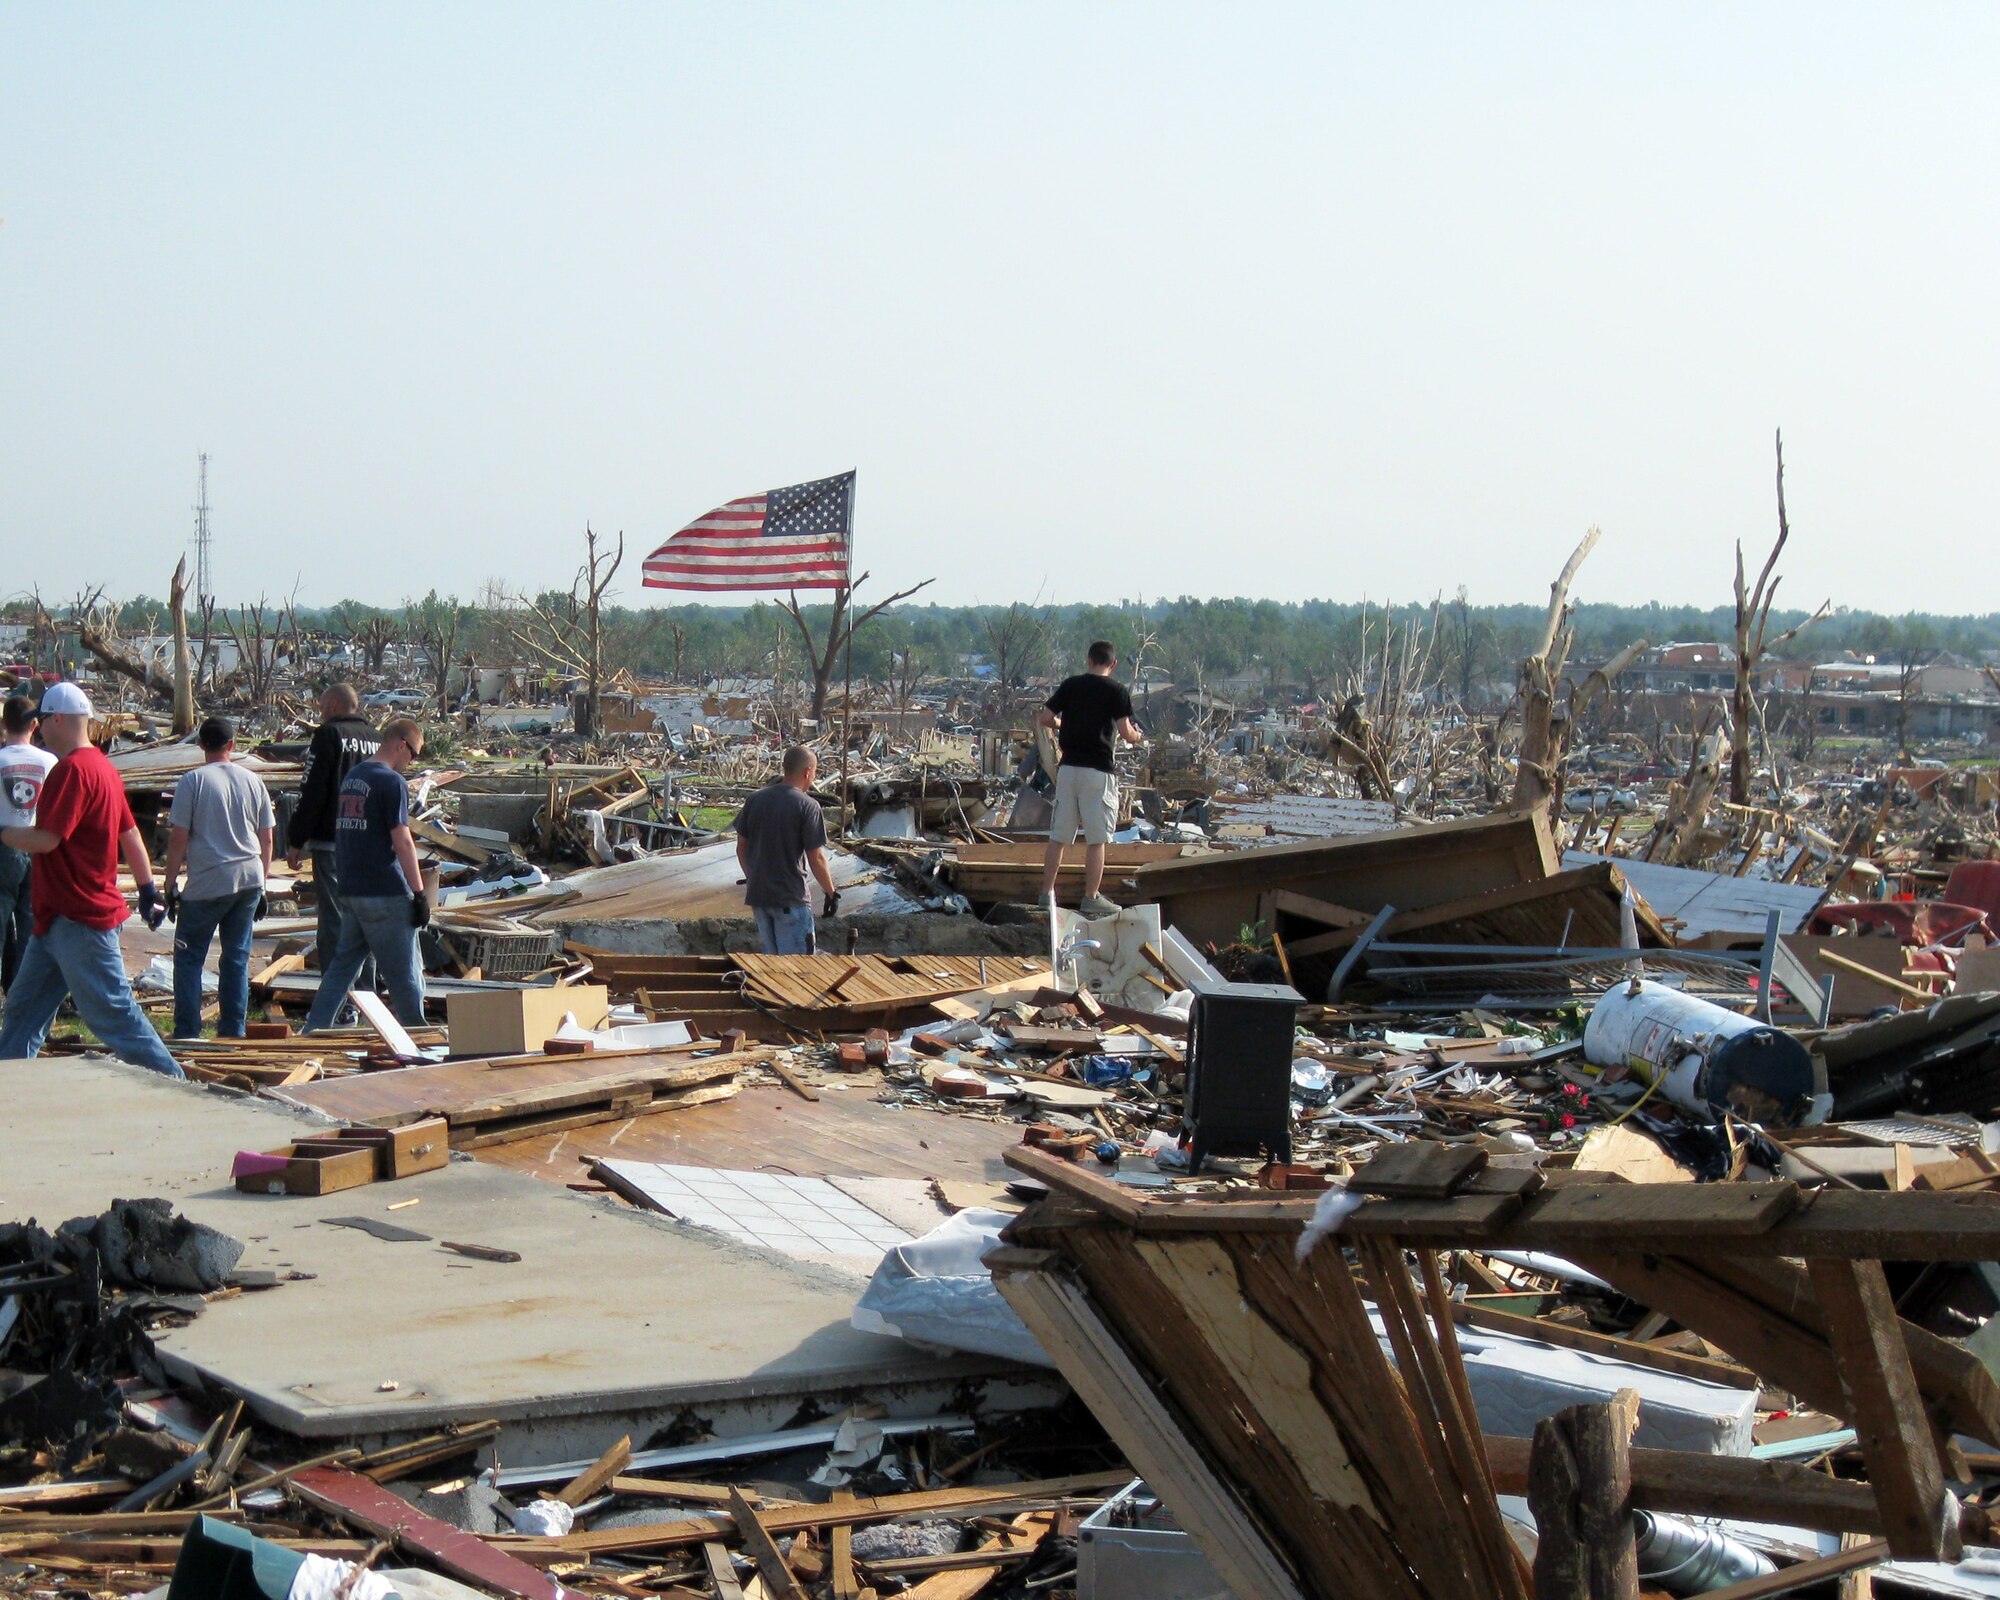 Volunteers from Altus Air Force Base and residents of Joplin, Mo., search through the rubble of the devastated city for survivors and personal belongings May 28, 2011. Joplin was hit by a tornado May 22. (Courtesy photo)